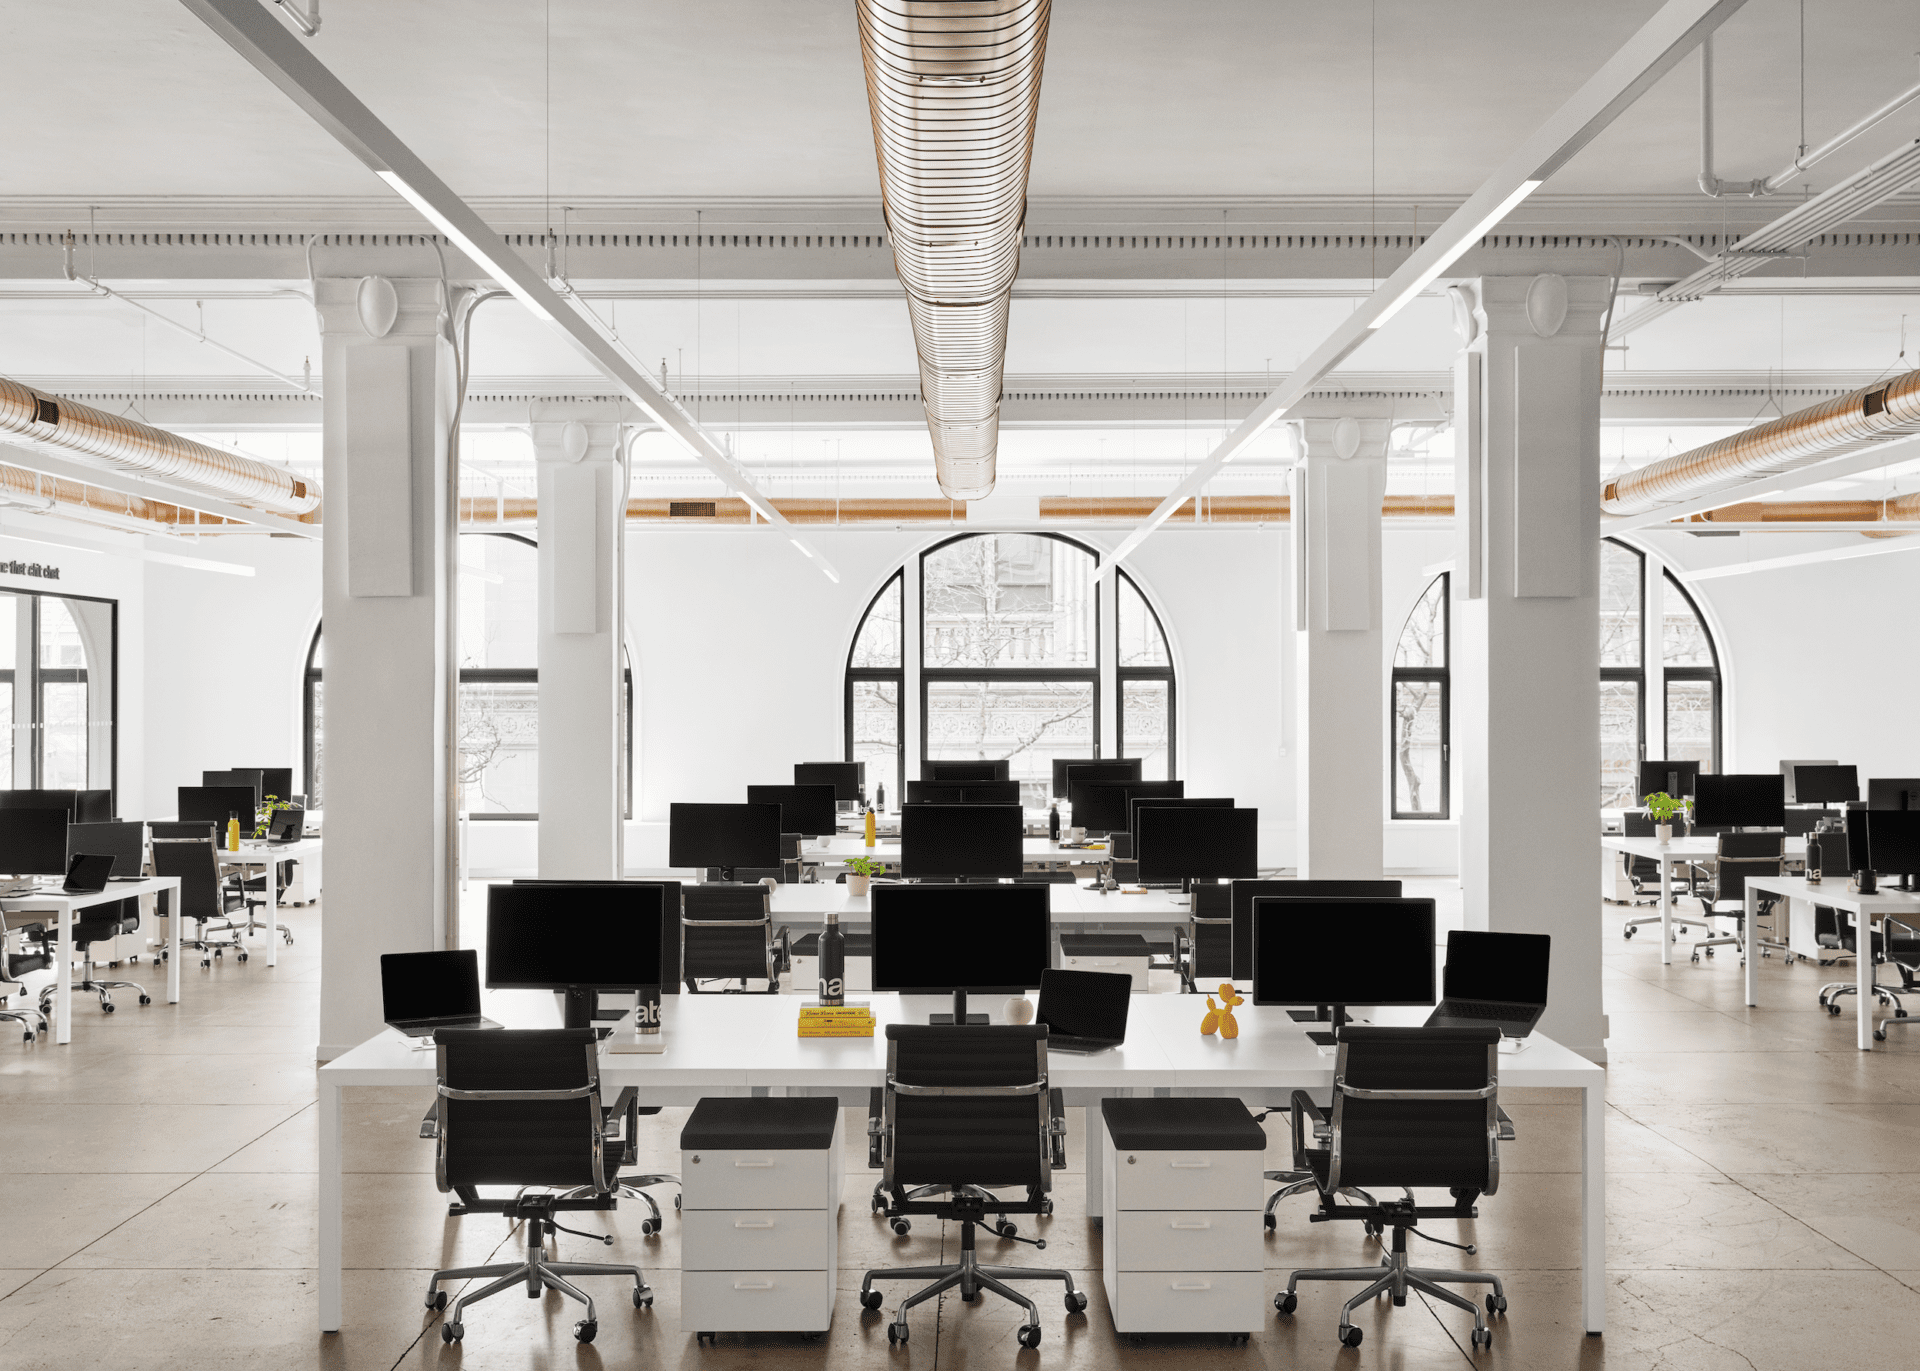 employee wellbeing, health and wellbeing, new york, office design, office interior, OnOffice magazine